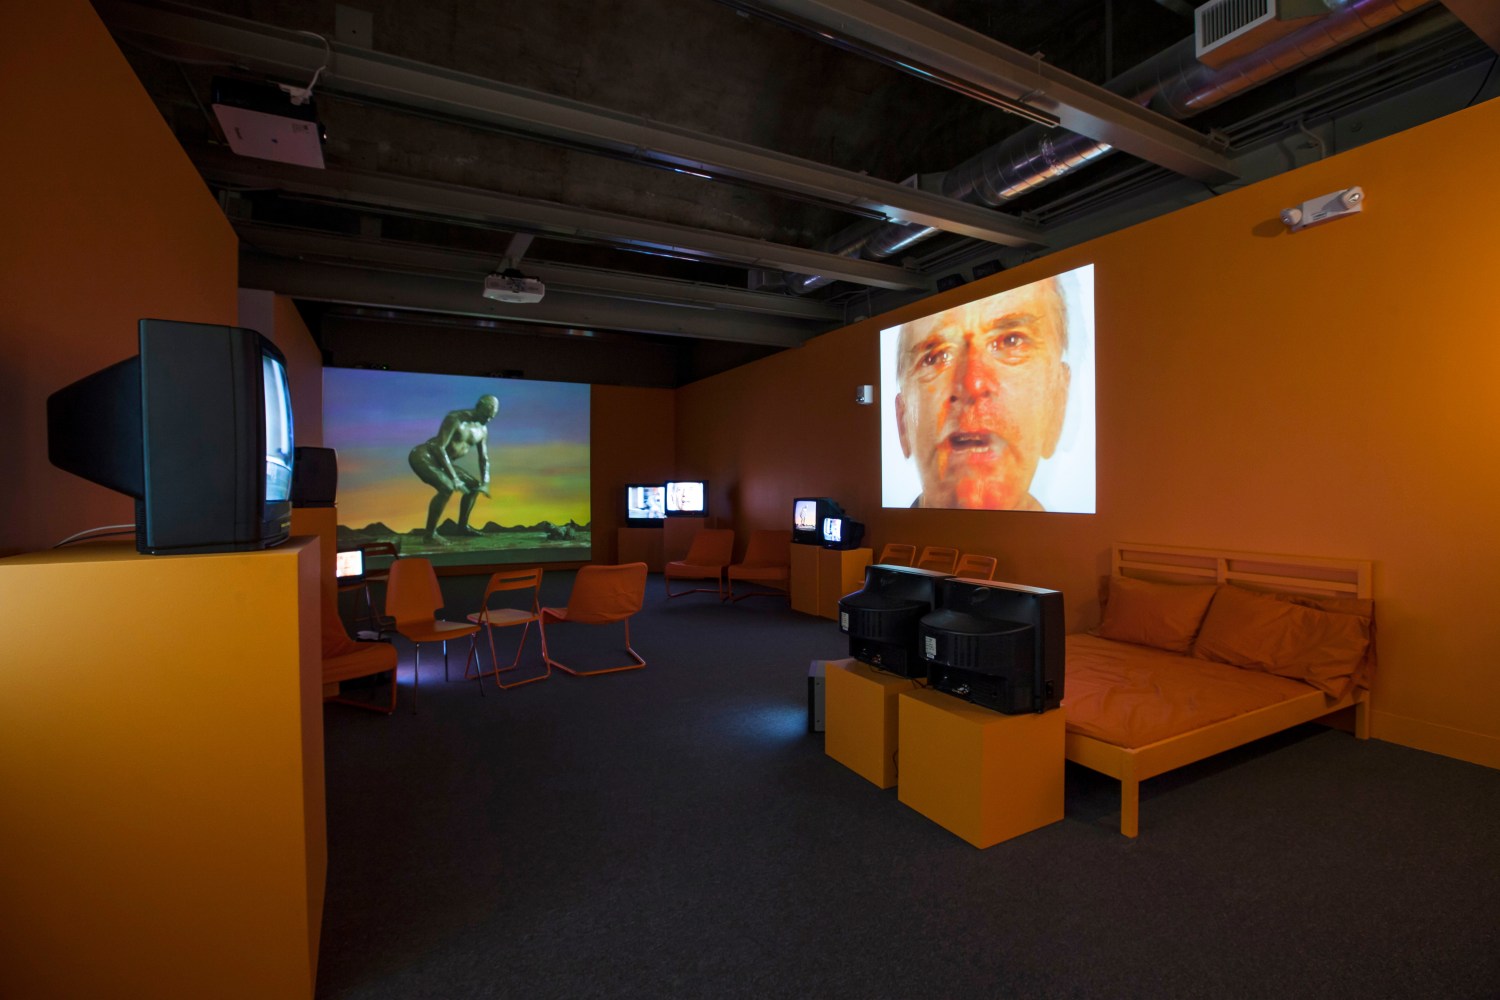 Charles Atlas
Cowboy Body
Installation view at&amp;nbsp;The Contemporary,&amp;nbsp;Austin, 2015